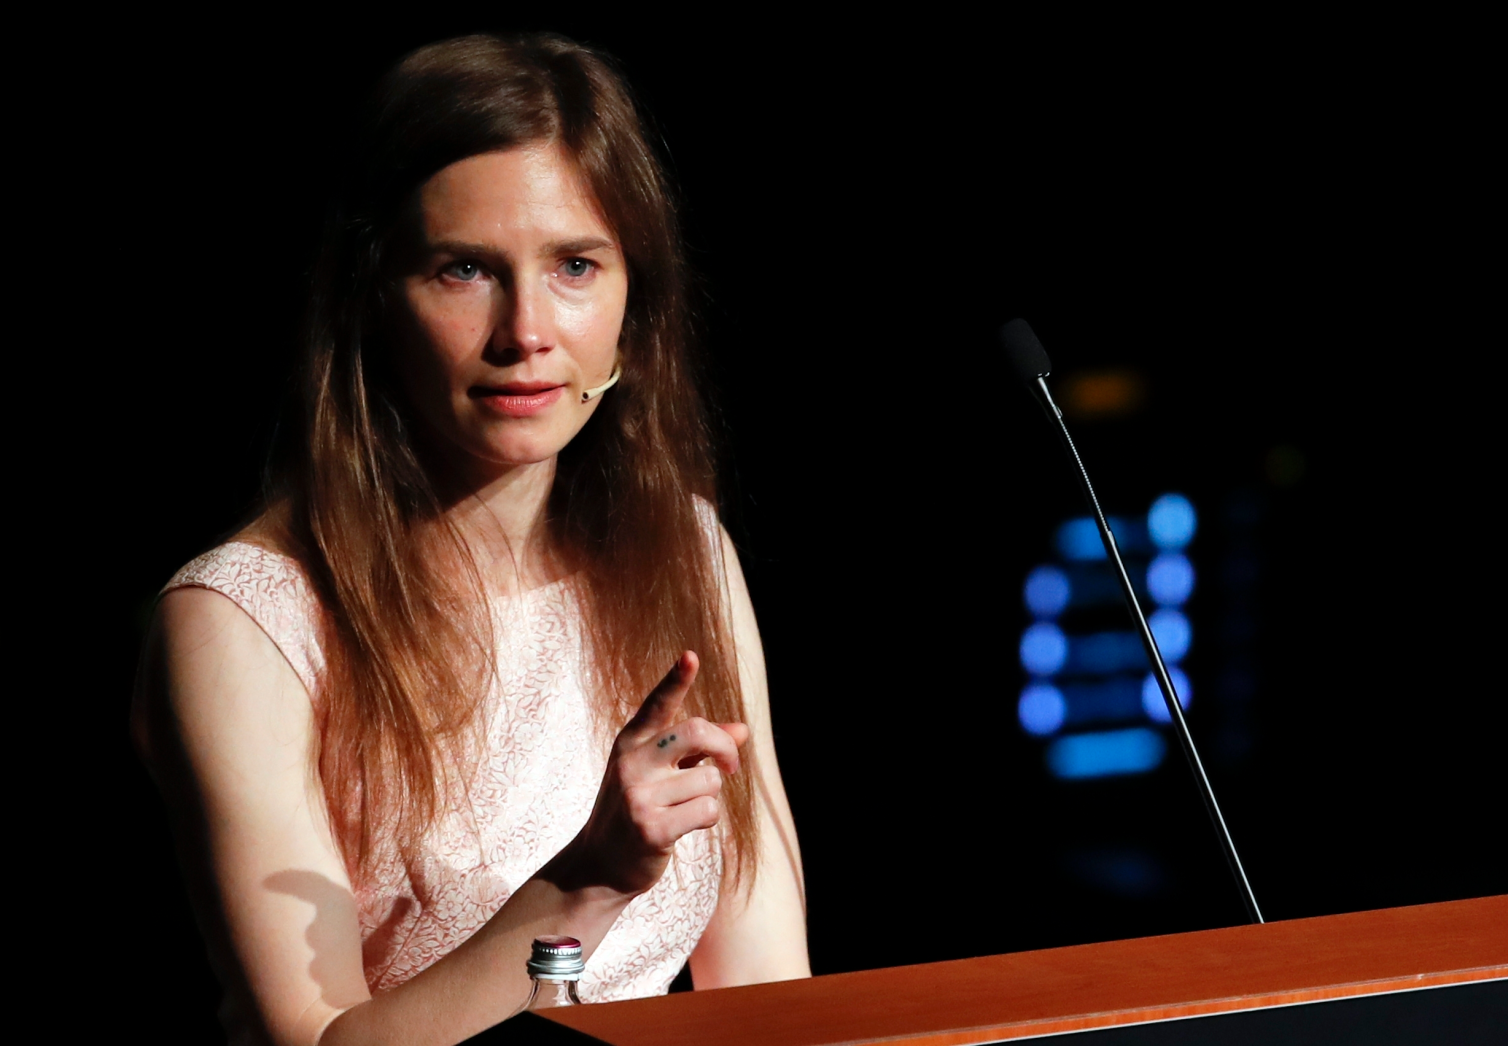 The 365 Foundation Welcomes Amanda Knox as the First Guest on Their New Podcast “In The Pink”